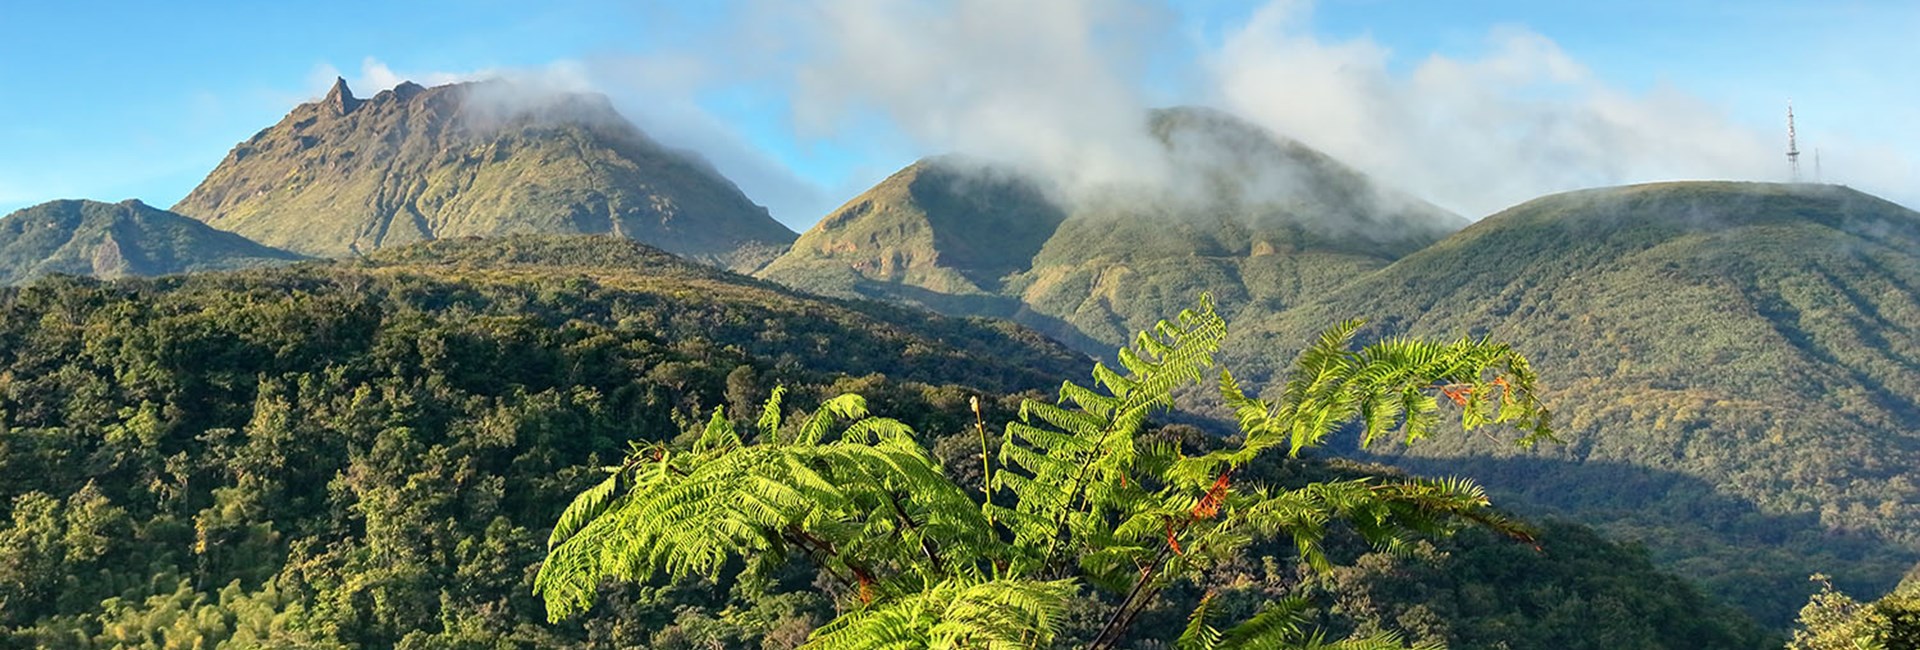 Tree covered peaks of Soufriere Volcano in Guadeloupe